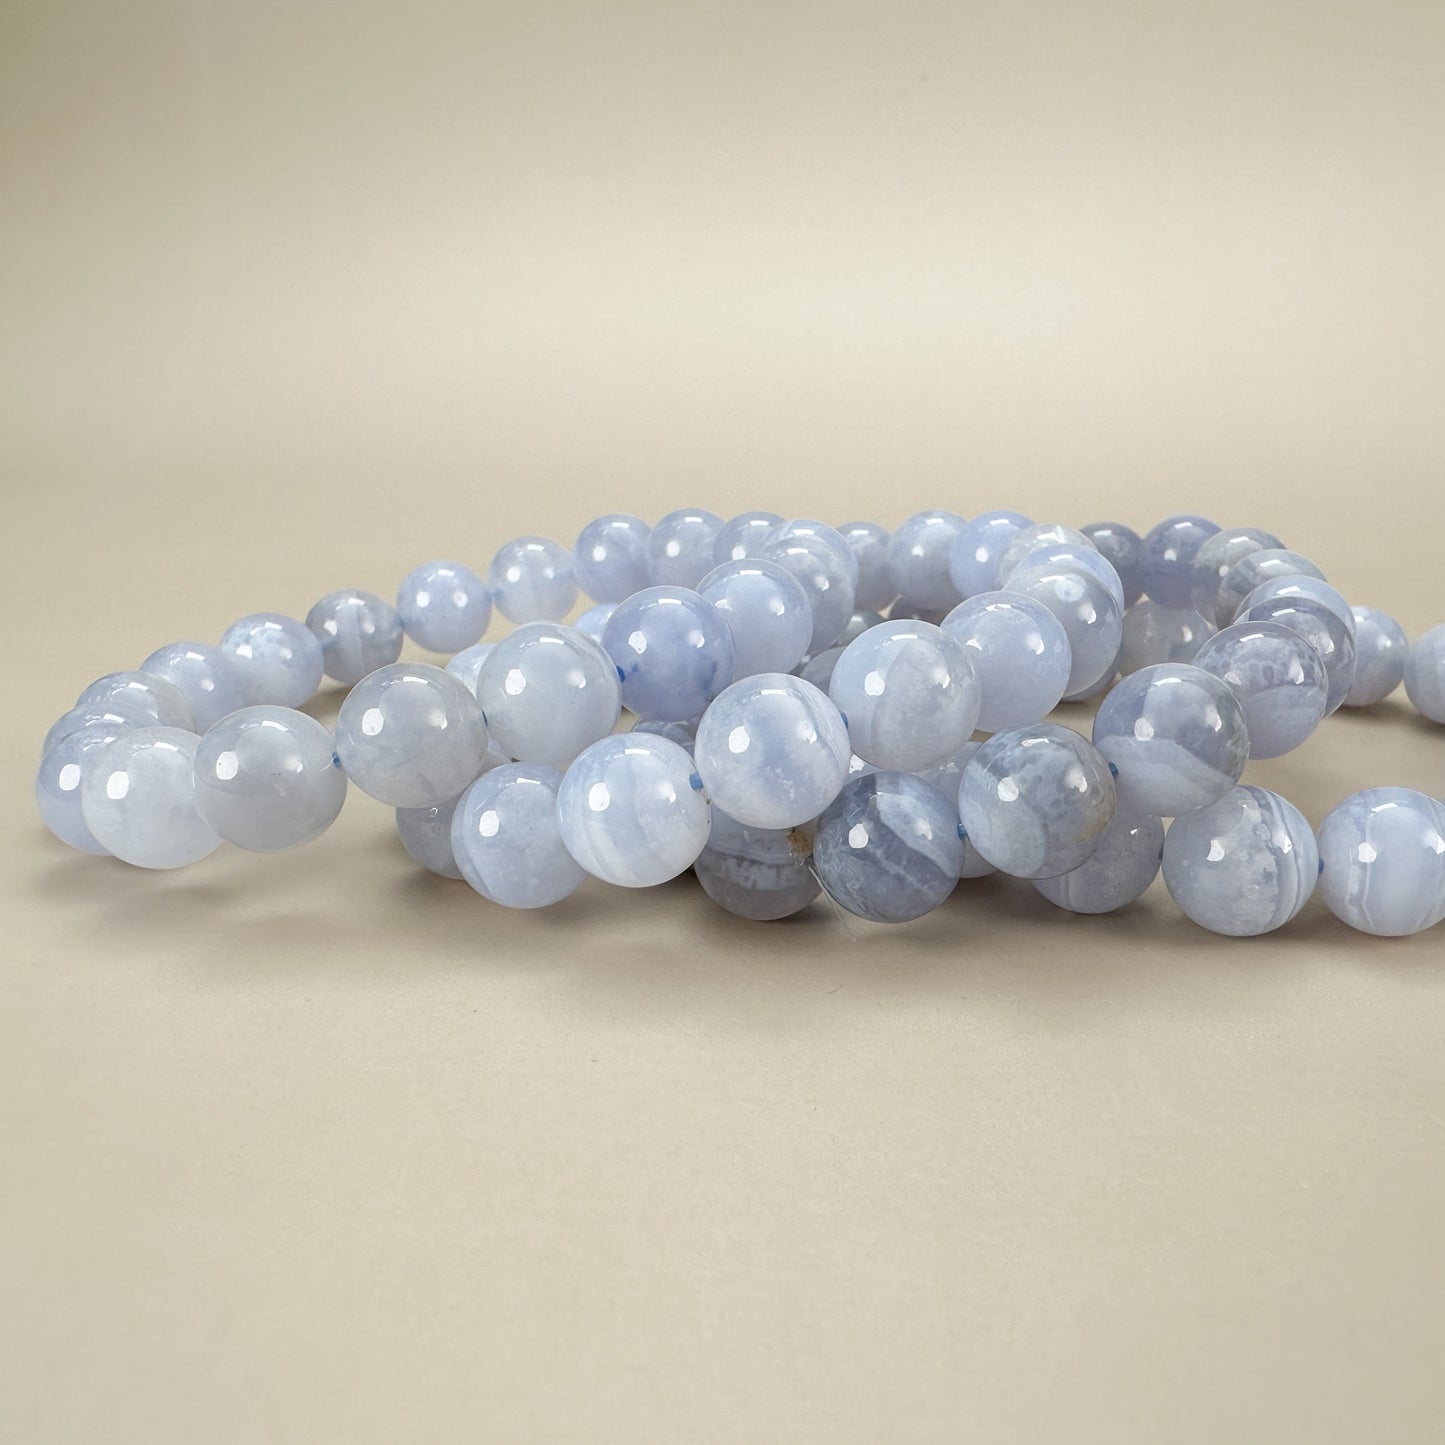 Blue Lace Agate 11mm Smooth Round Bead Stretchy Bracelet - 1 pc. (J214)